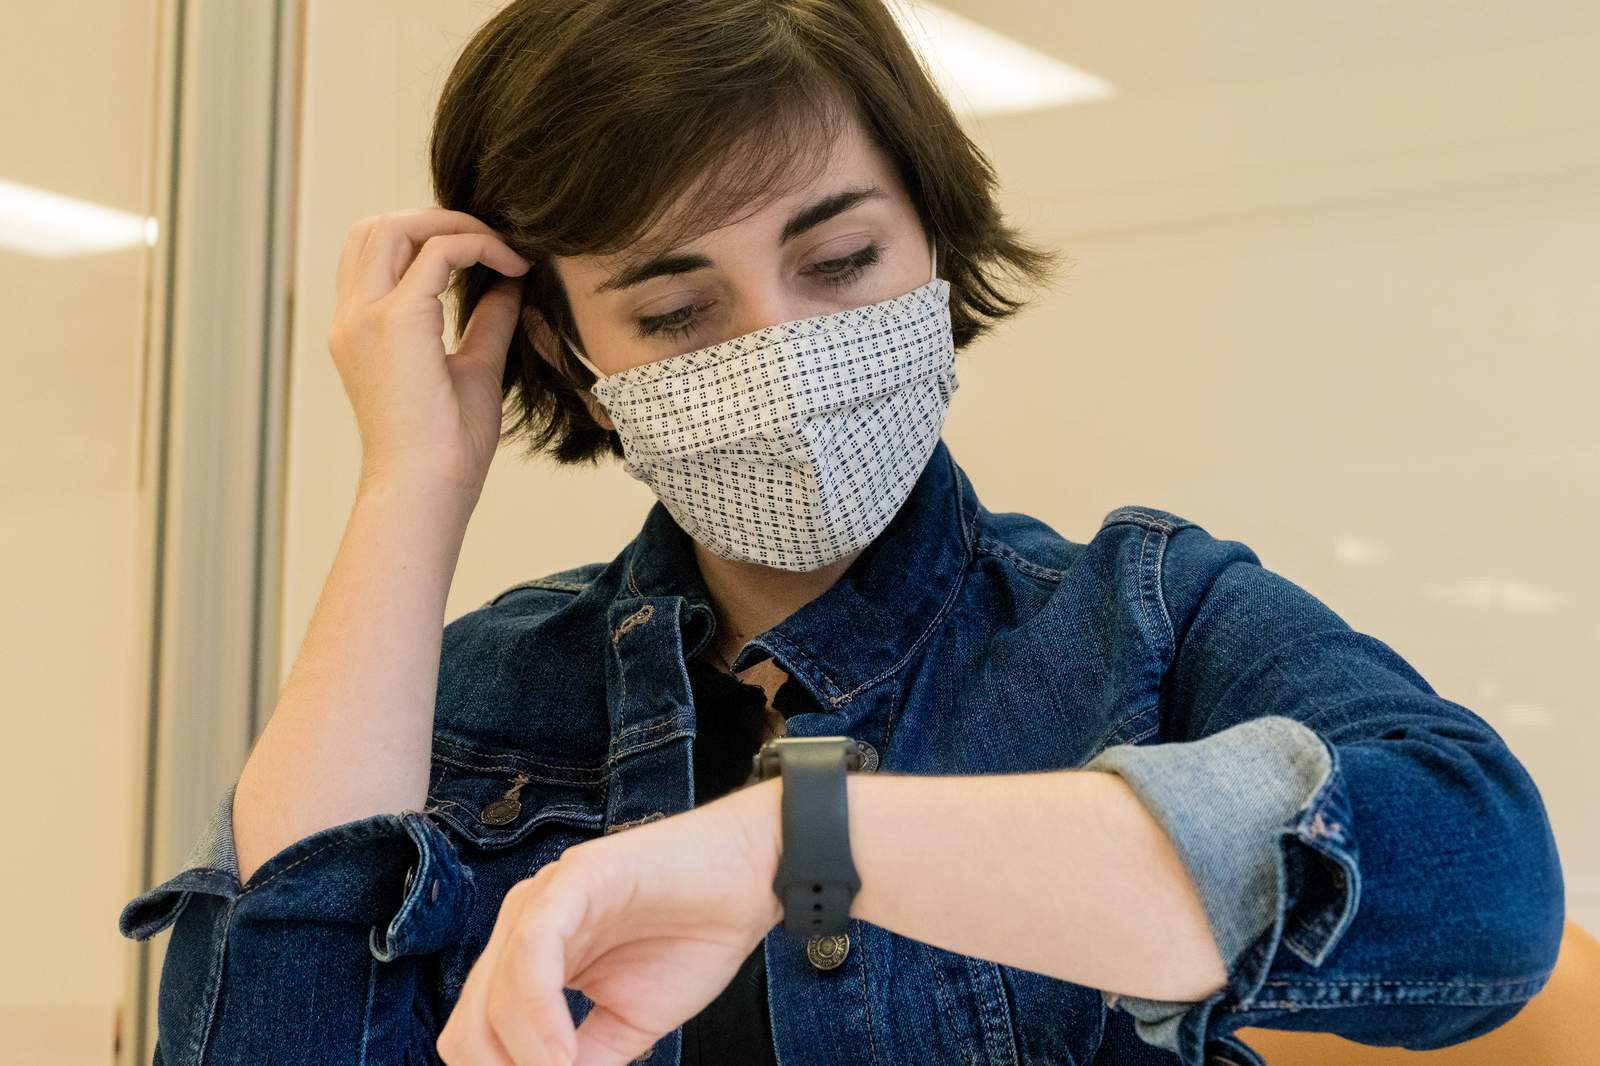 Can a smartwatch app fend off face touching amid pandemic?